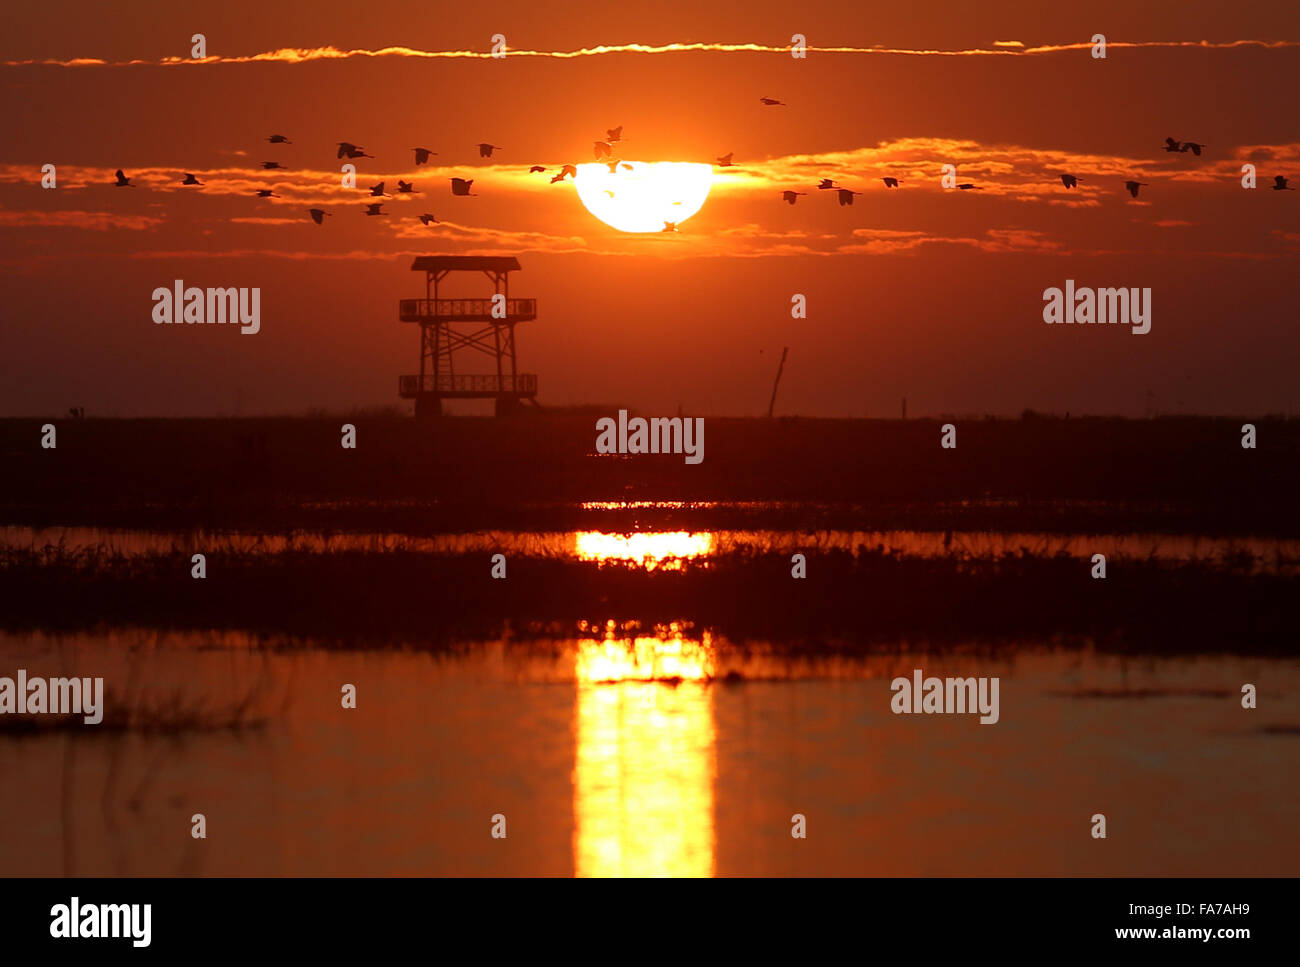 Bago. 23rd Dec, 2015. Photo taken on Dec. 23, 2015 shows birds flying over Moeyungyi Wetland Wildlife Sanctuary in Bago region, Myanmar. Moeyungyi Wetlands is situated in Bago Division. Every year, millions of birds usually fly from the northern hemisphere to the south along the East-Asian Australian Flyway to escape from winter. They stop to rest and feed in Asia. So the flyway contains a network of wetlands and Moeyungyi is one of which could cooperate to certain migrated as well as domestic birds. Credit:  U Aung/Xinhua/Alamy Live News Stock Photo